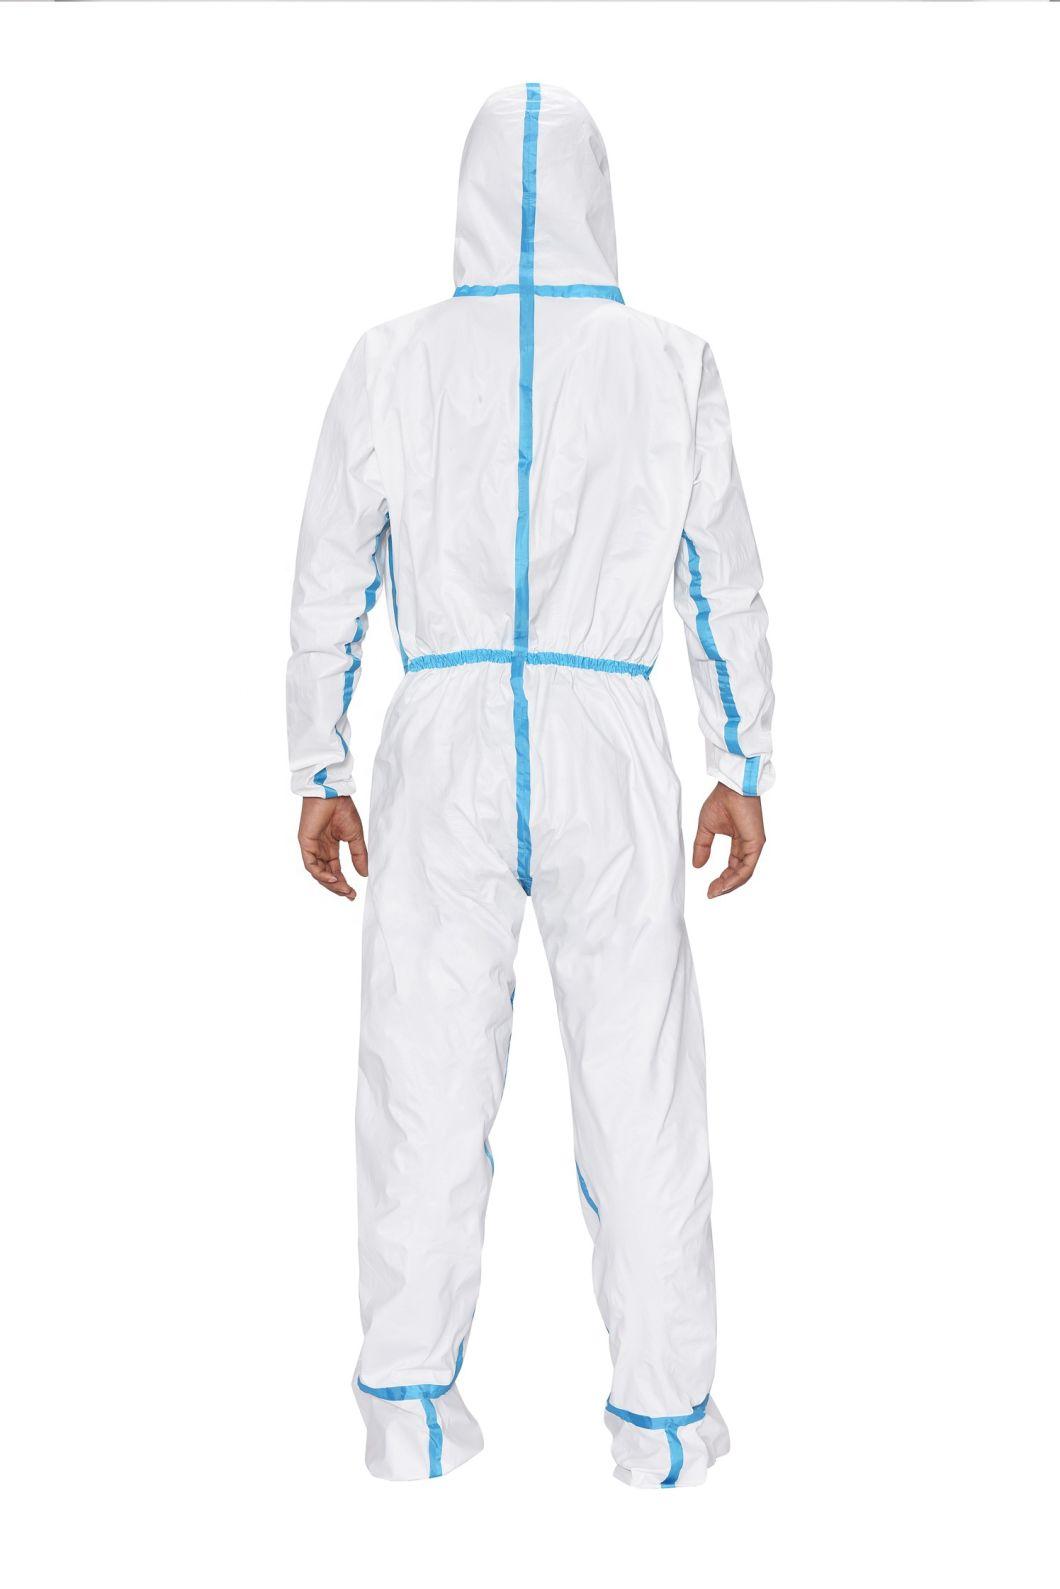 Anti-Virus Sterile Disposable Safety Suit Protective Clothing Medical Coveralls with Shoe Cover